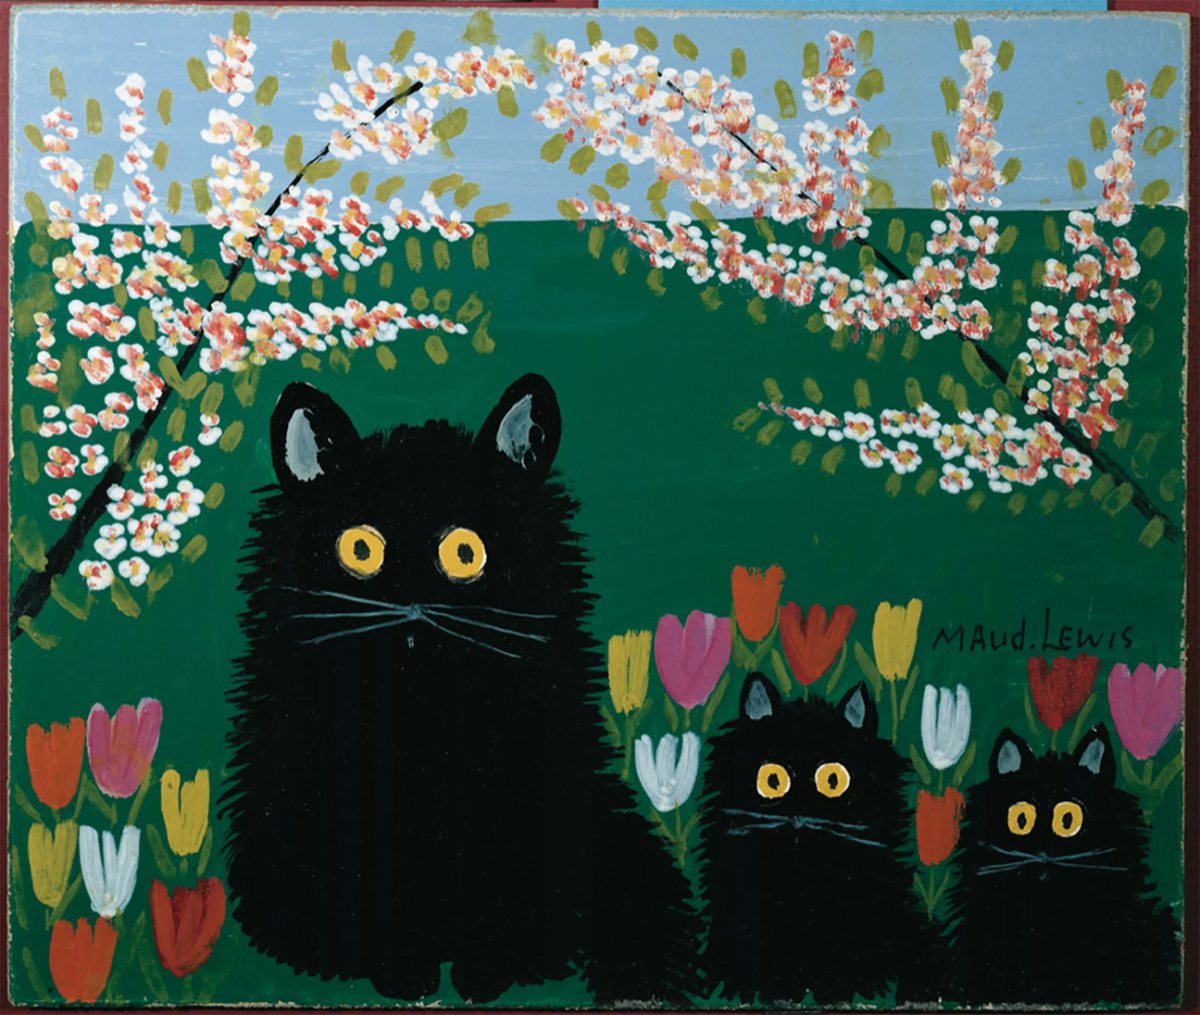 A Maud Lewis painting of three black cats in a folk art style with flowers behind.